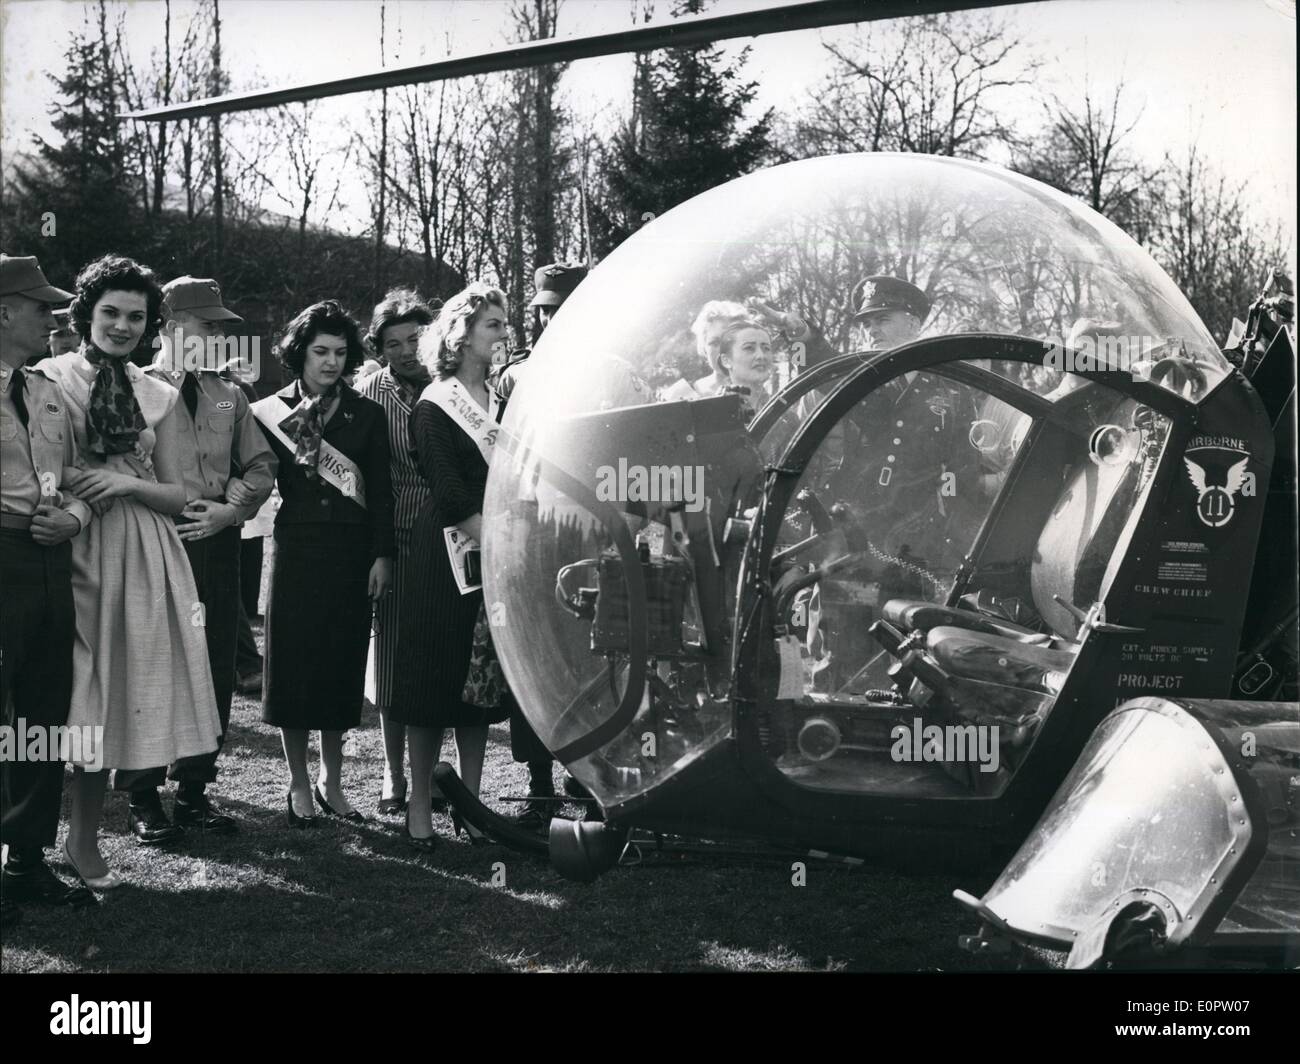 Mar. 03, 1957 - A pleasures for GI's: was the visit of beauty queens of Sweden, Finland, Dutch, France, Greece, Austria, Swiss and Germany to the Engels division of the American Armee at Augsburg/Germany. Each queen became a member of honour to the division. Photo Shows The beauty queens looking at a helicopter. from left to right Miss Greece, Switzerland and Sweden. Stock Photo